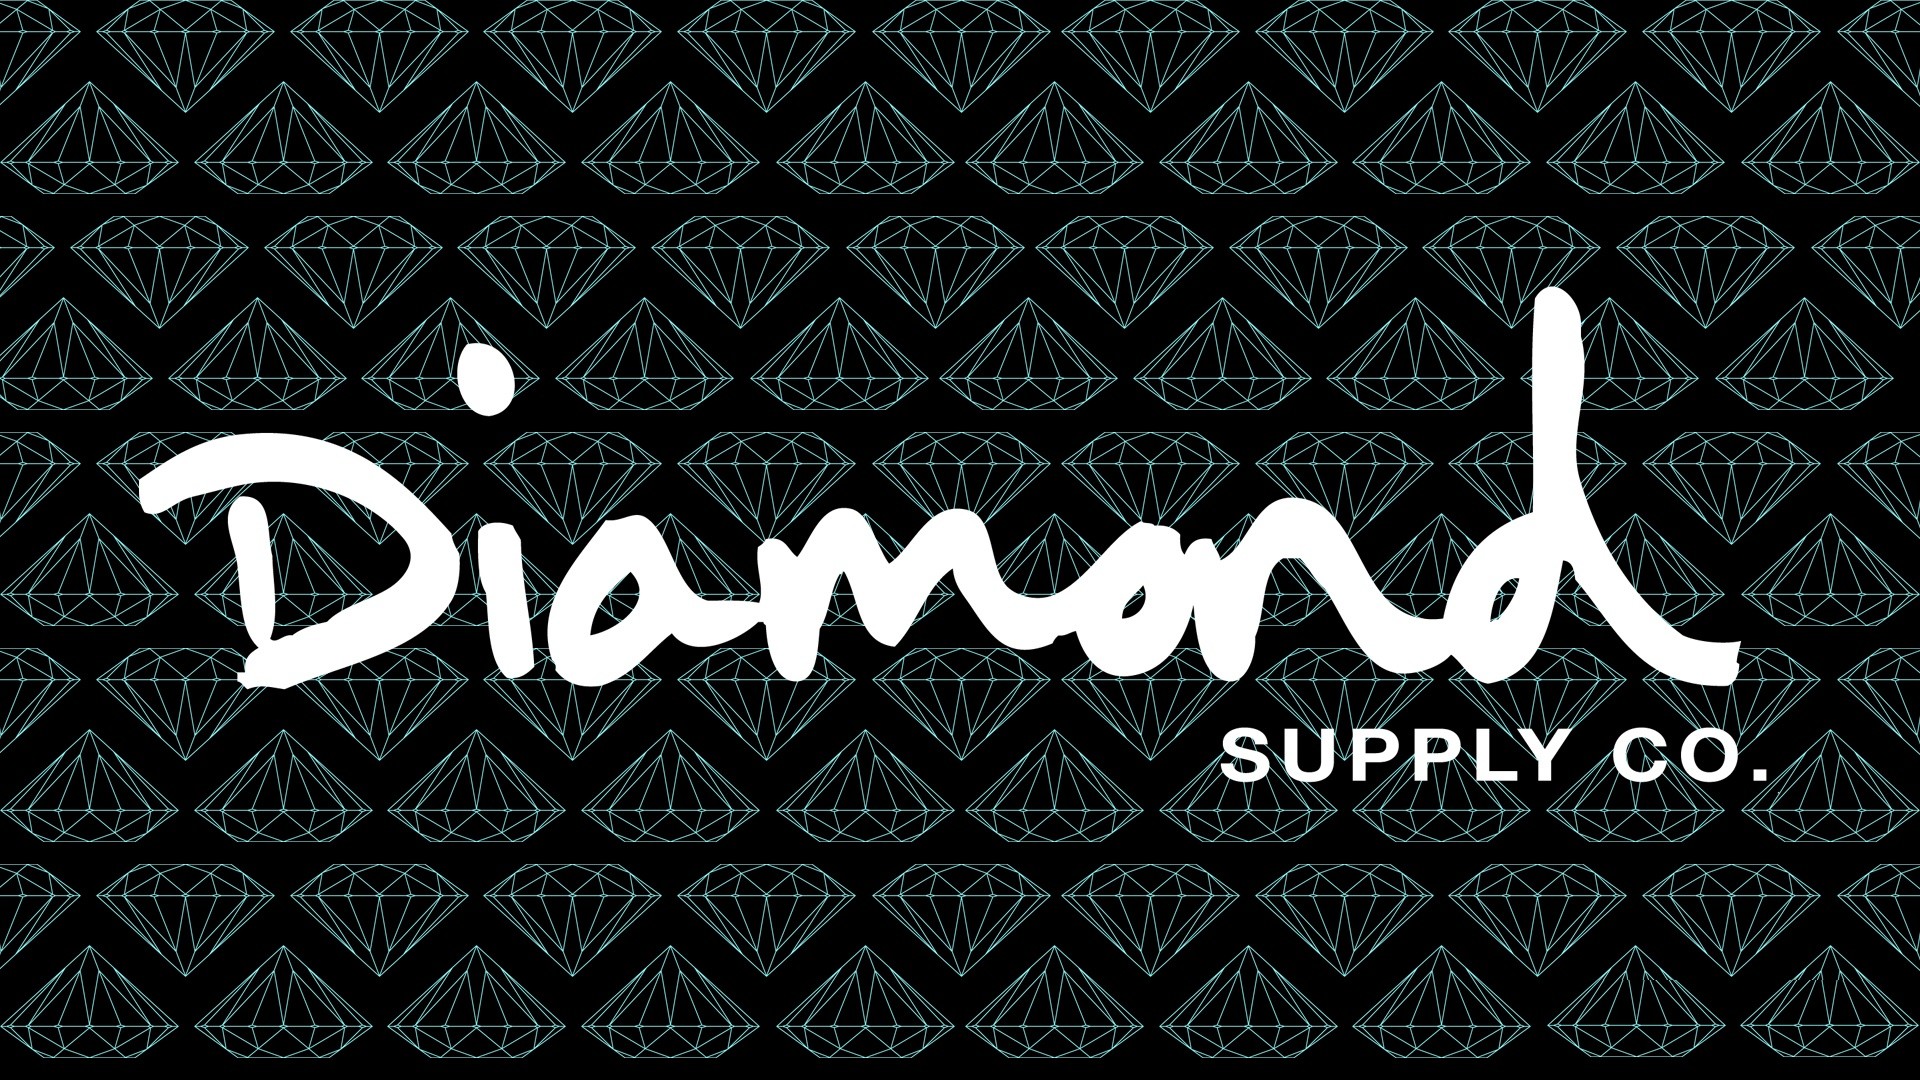 1920x1080 Diamond Supply Co Wallpapers - HD Wallpapers Pop